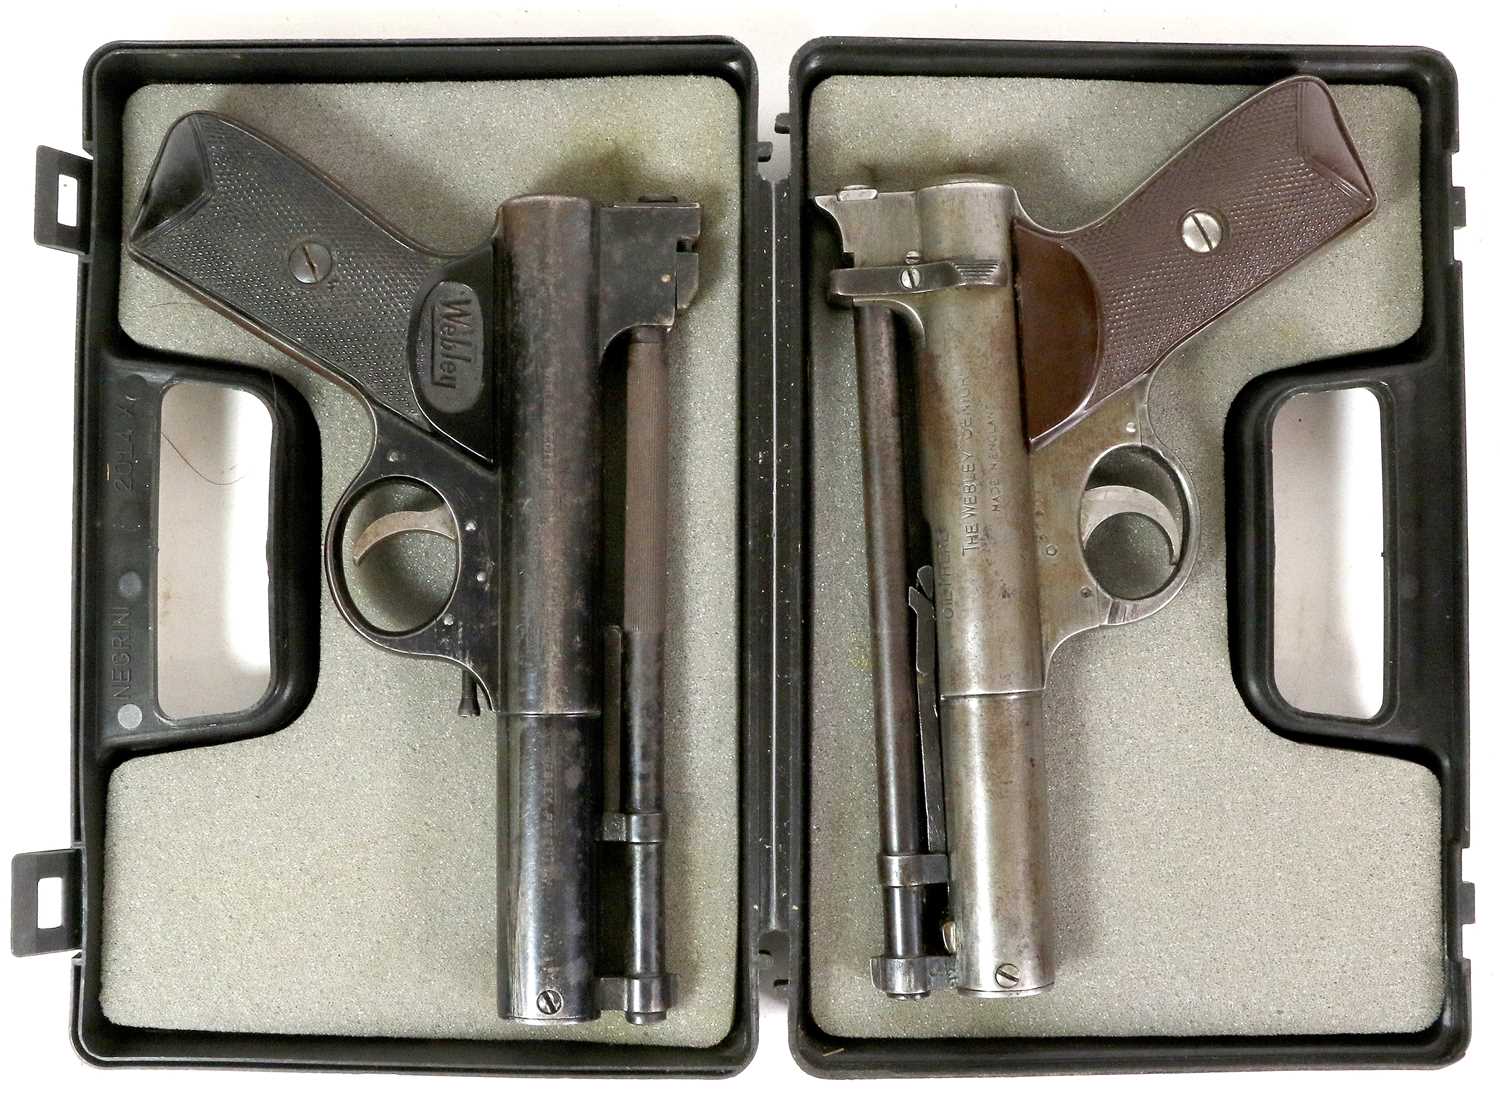 PURCHASER MUST BE 18 YEARS OF AGE OR OVERA Webley Senior .177 Calibre Air Pistol, numbered S7901, - Image 2 of 2